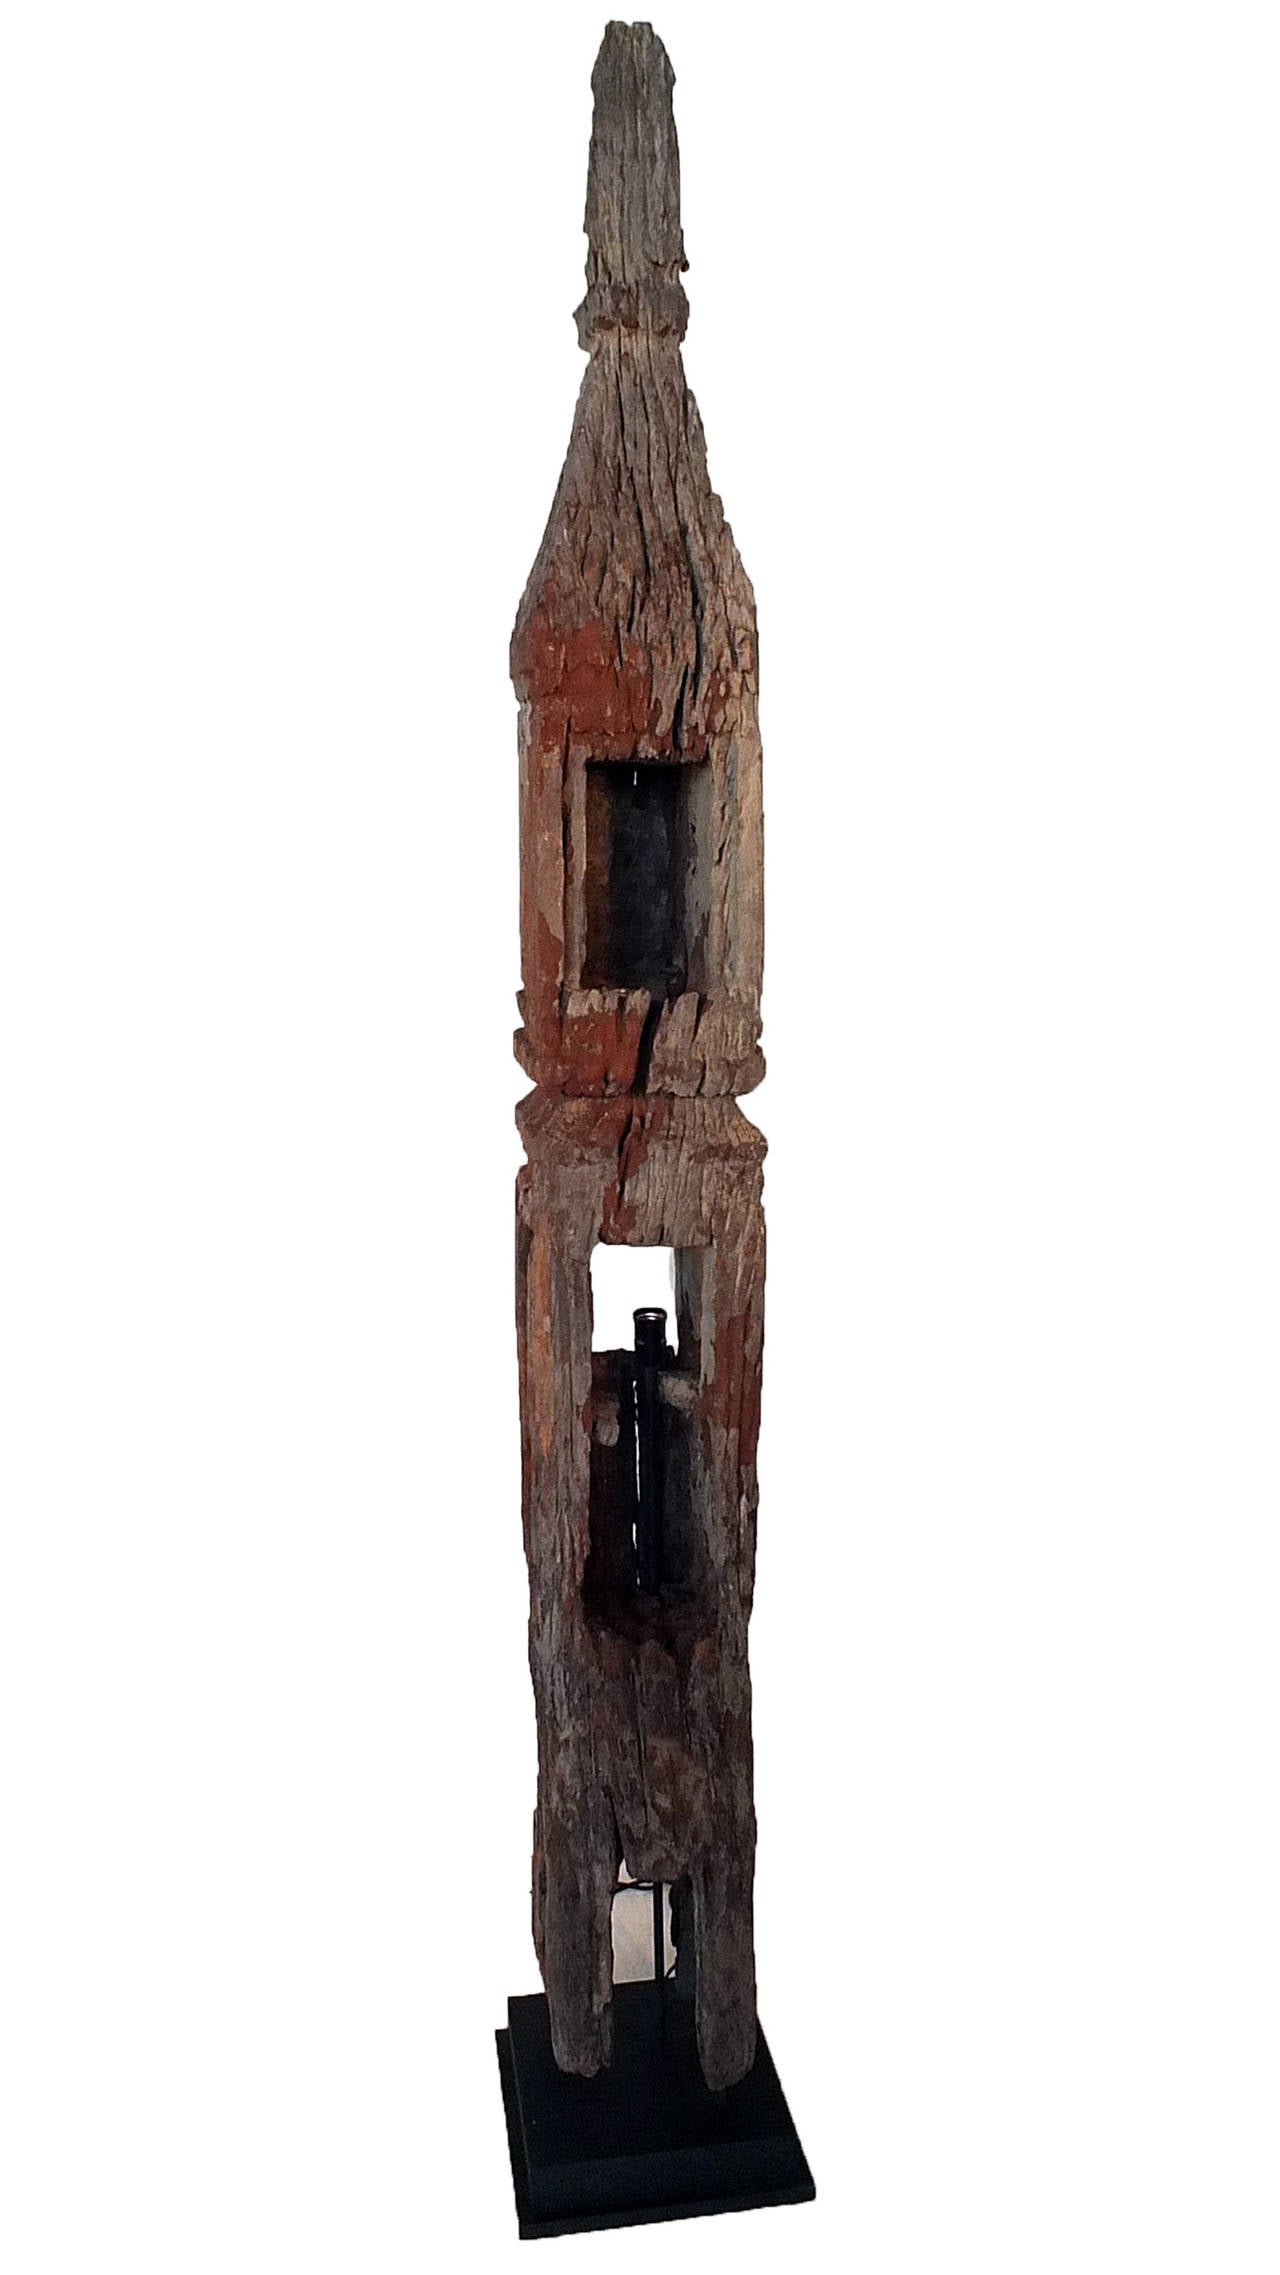 The pointed spire is raised above a square pillar with multiple carved niches, of which the middle has been retrofitted as a lamp. Remnants of the original paint have since weathered and faded to a rust-like color.